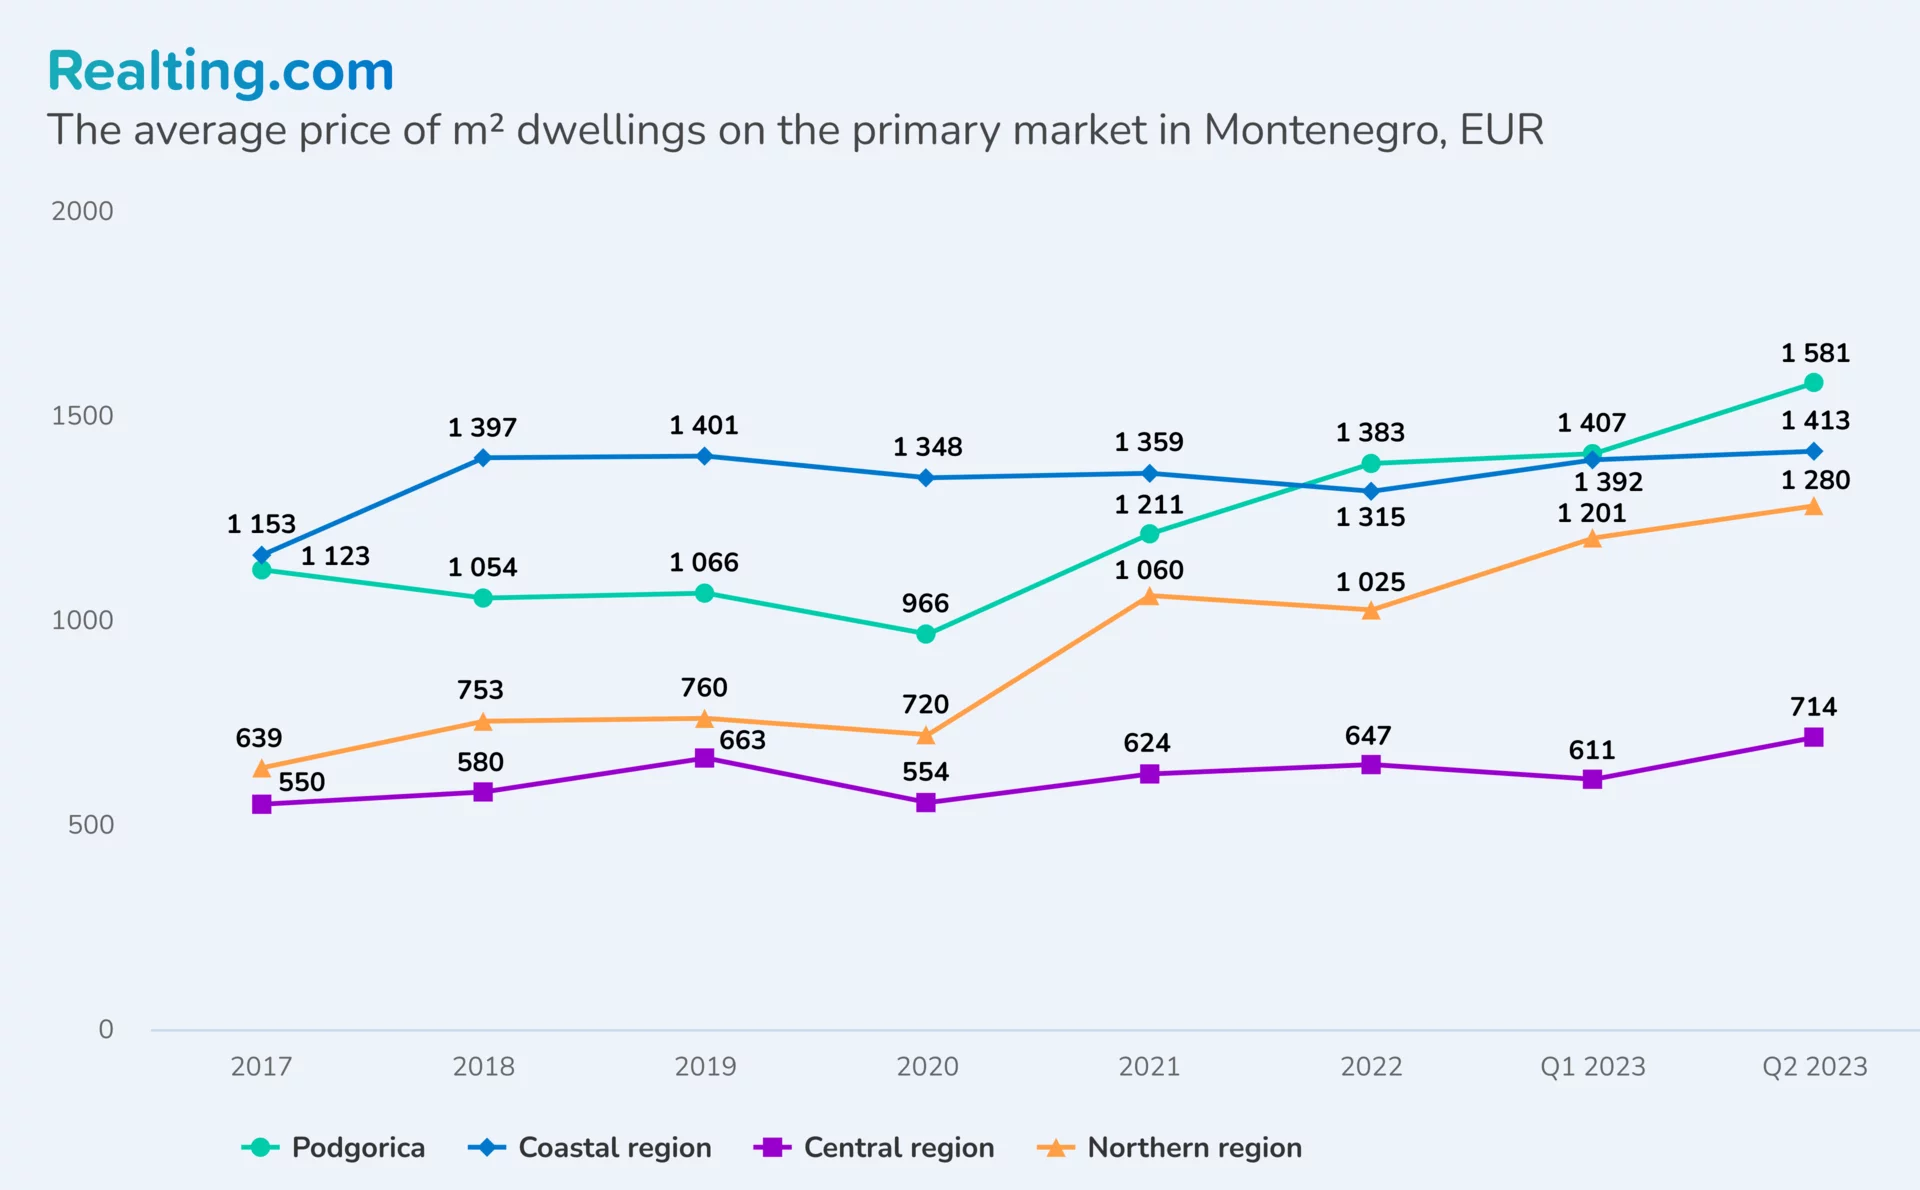 The average price of sq.m. dwellings on the primary market in Montenegro, EUR